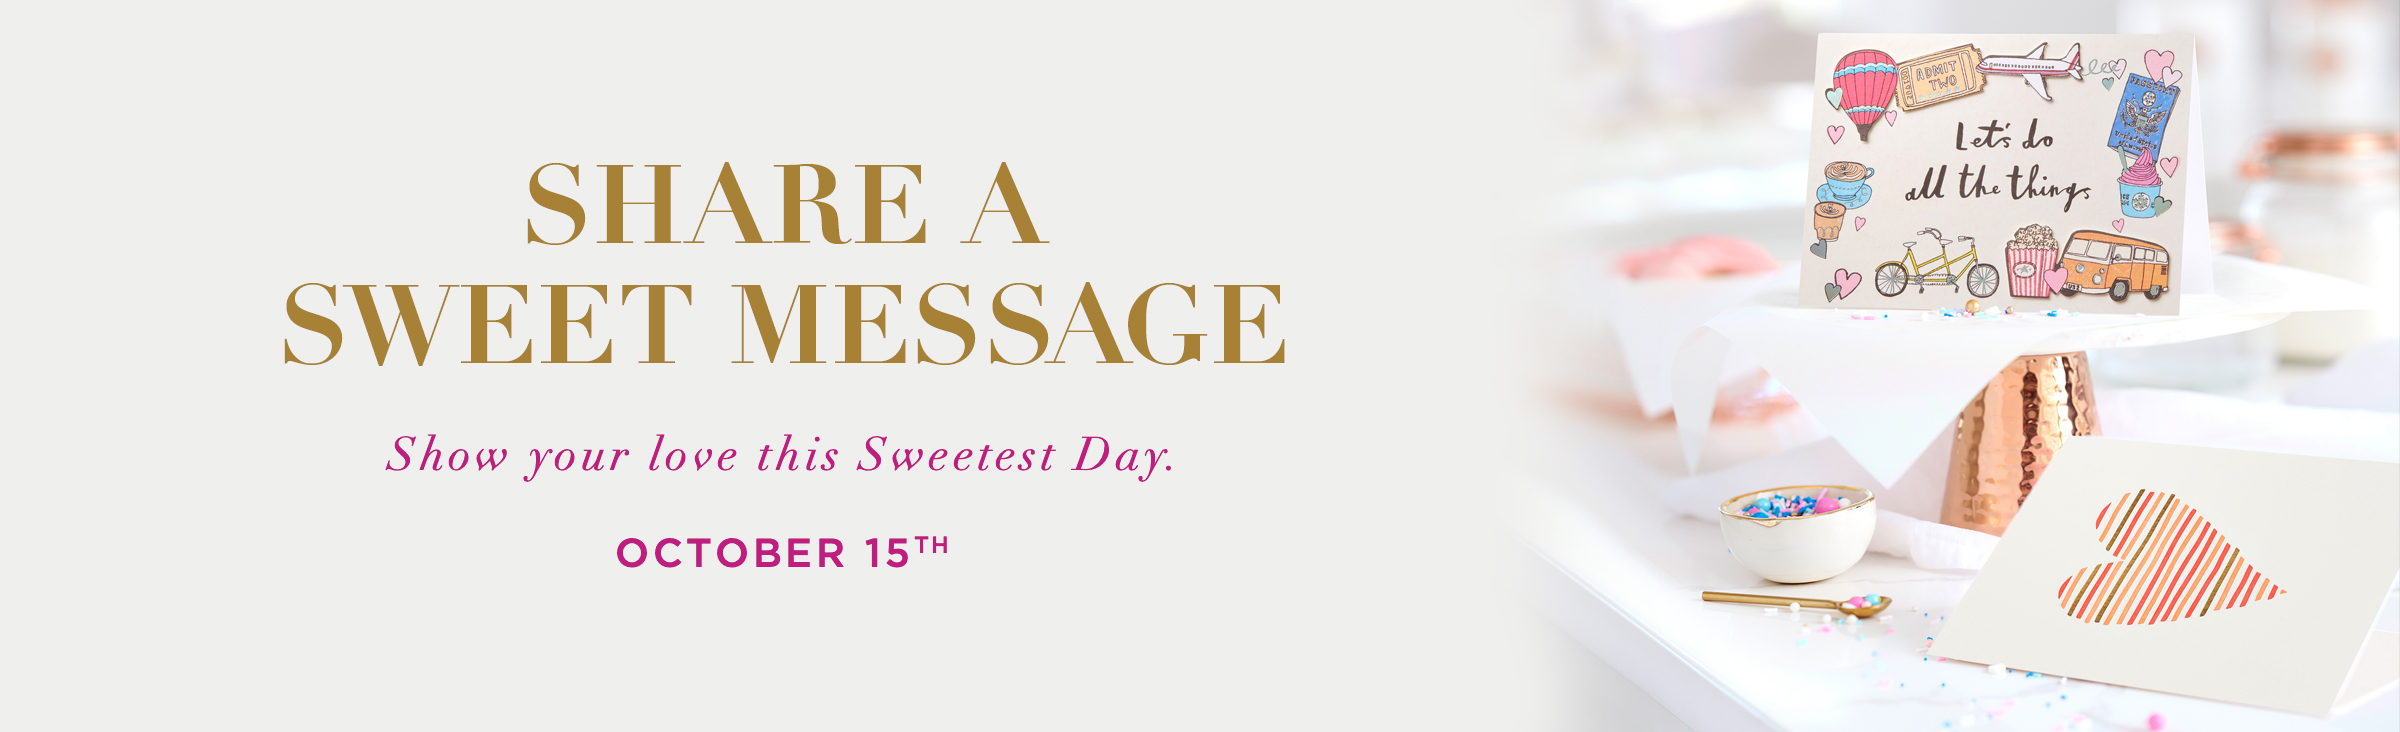 Share A Sweet Message Show Your Love This Sweetest Day